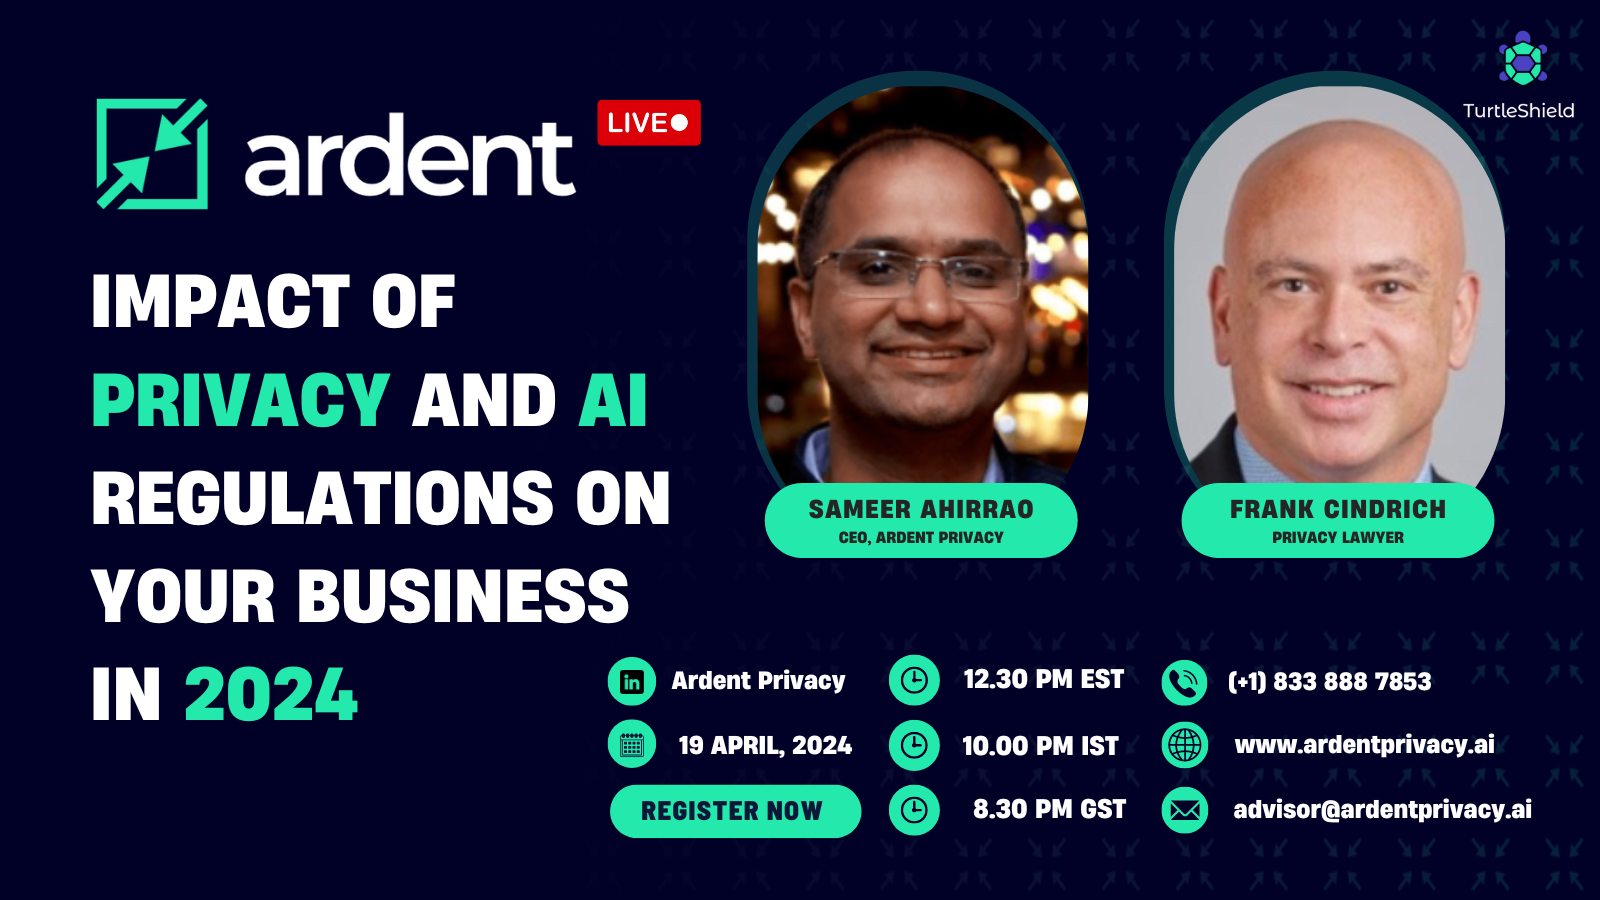 Webinar - Impact of Privacy and AI Regulations on your business in 2024